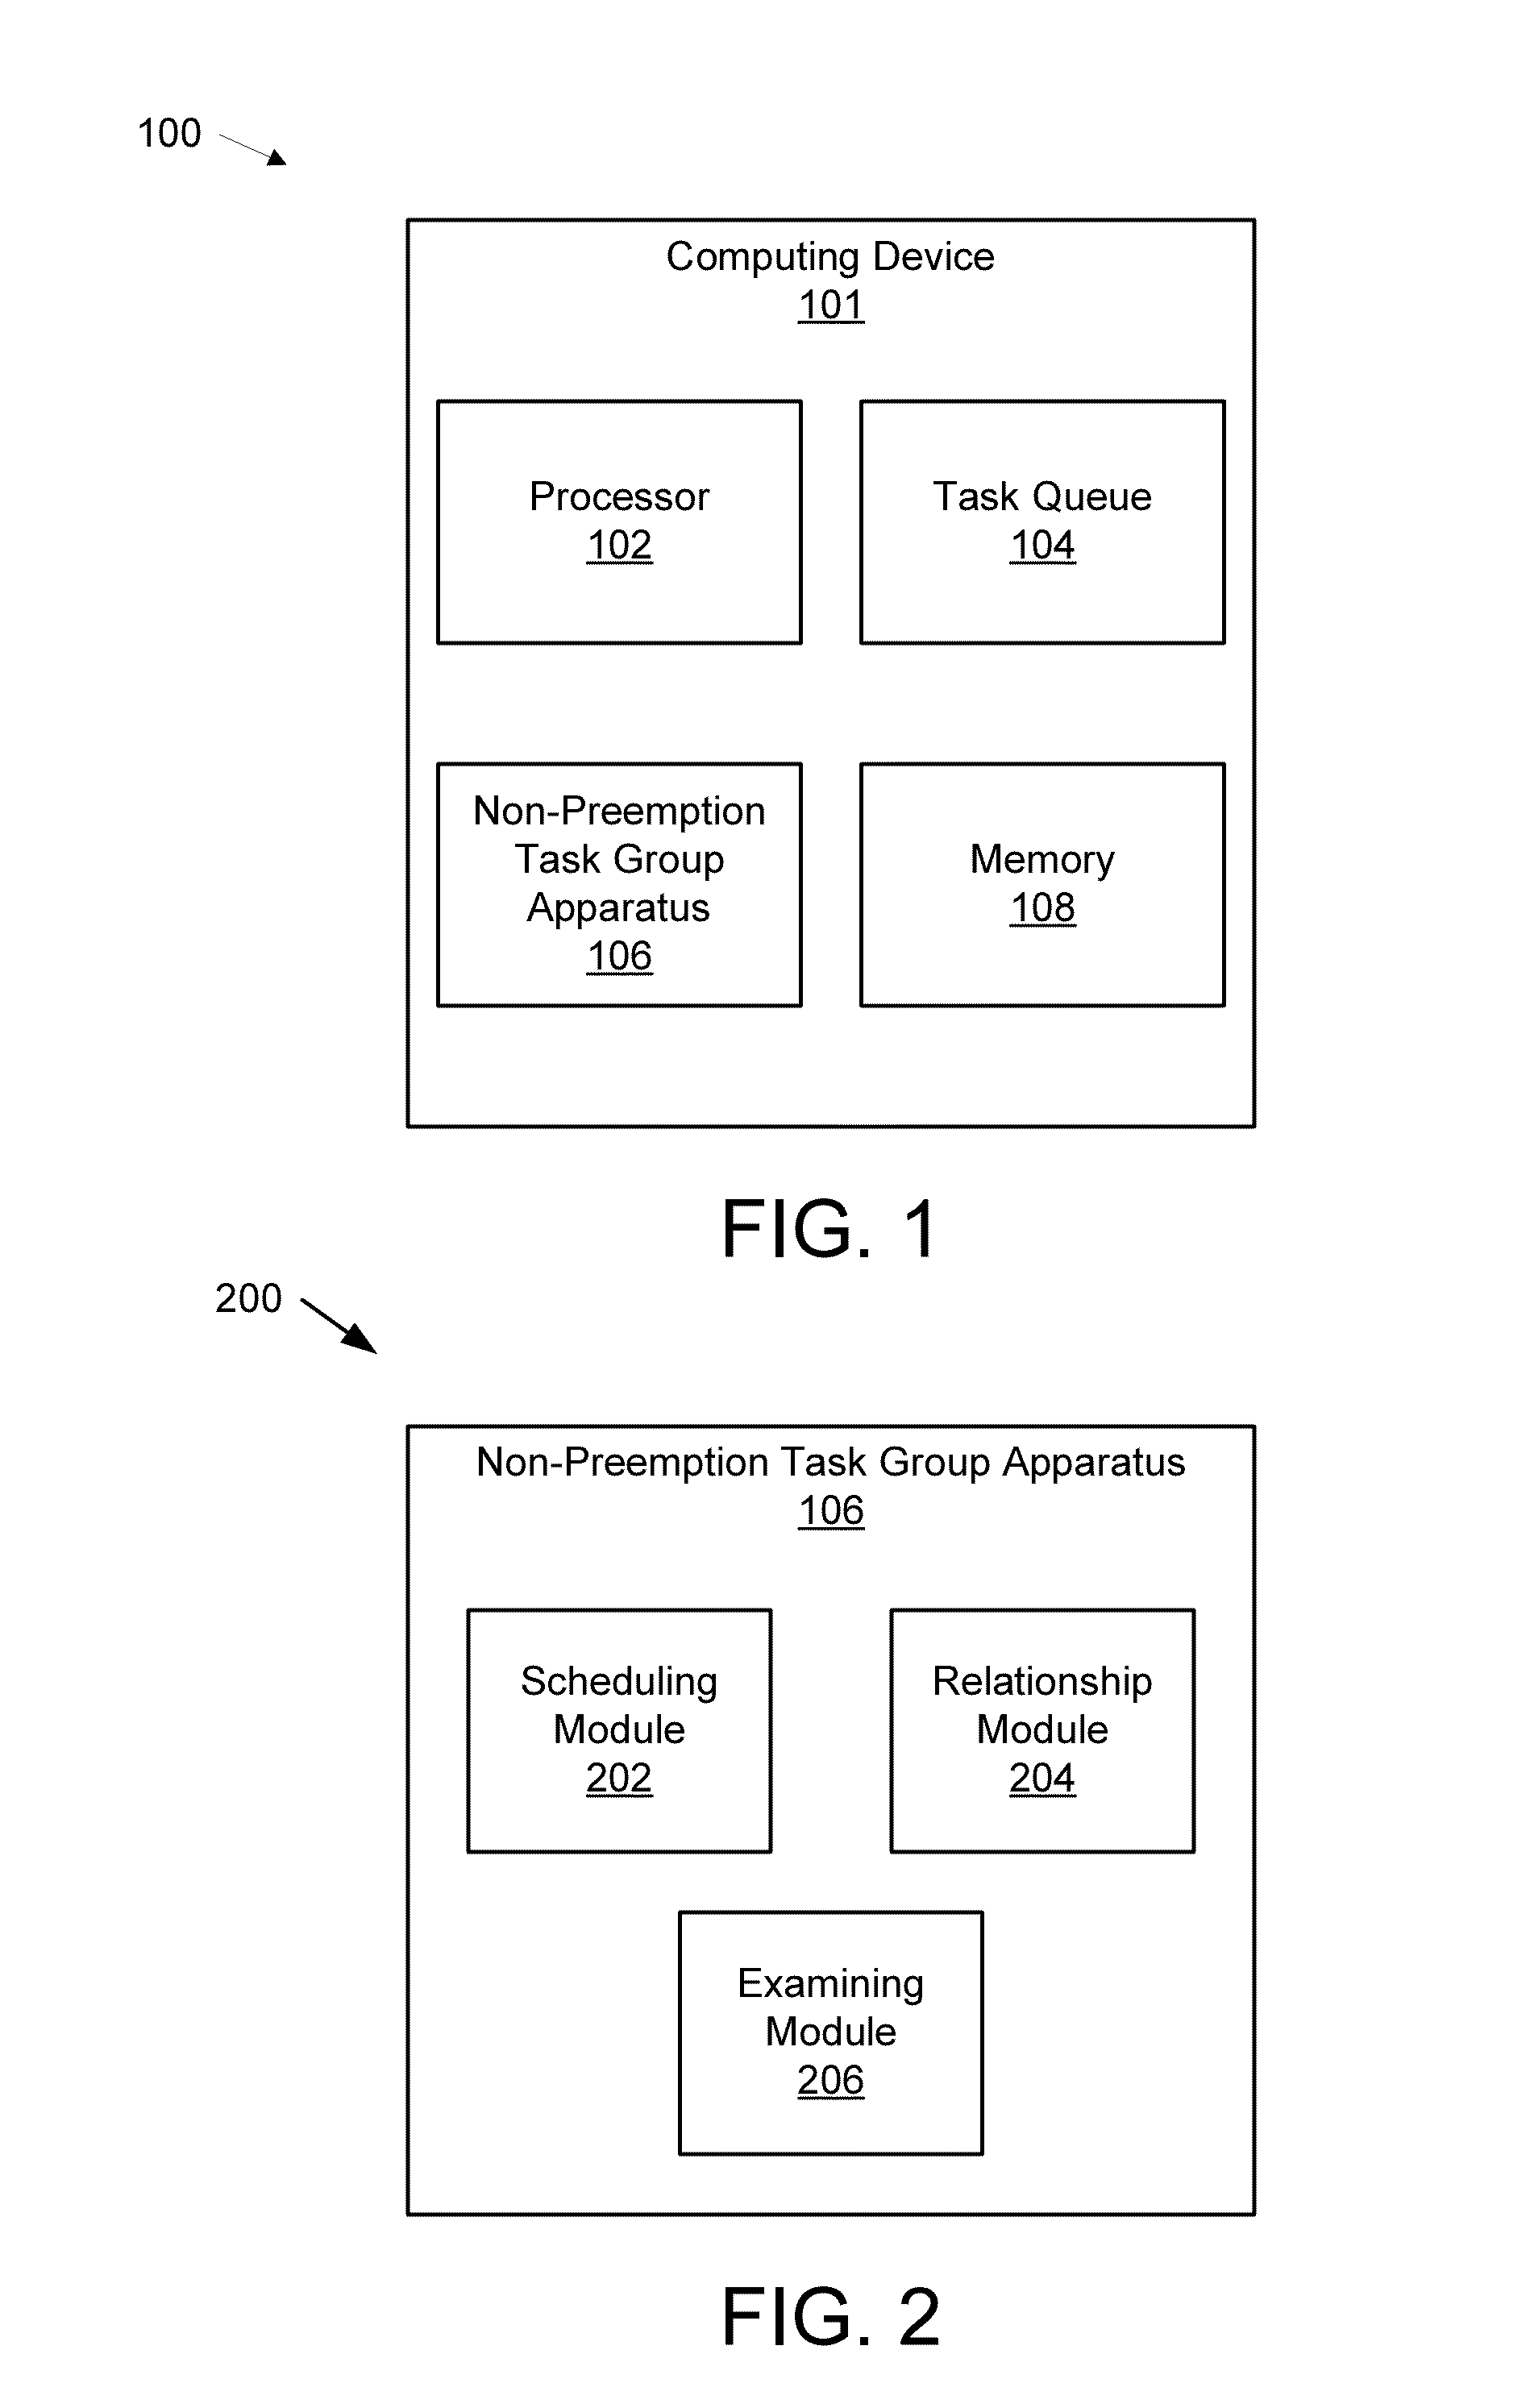 Non-preemption of a group of interchangeable tasks in a computing device